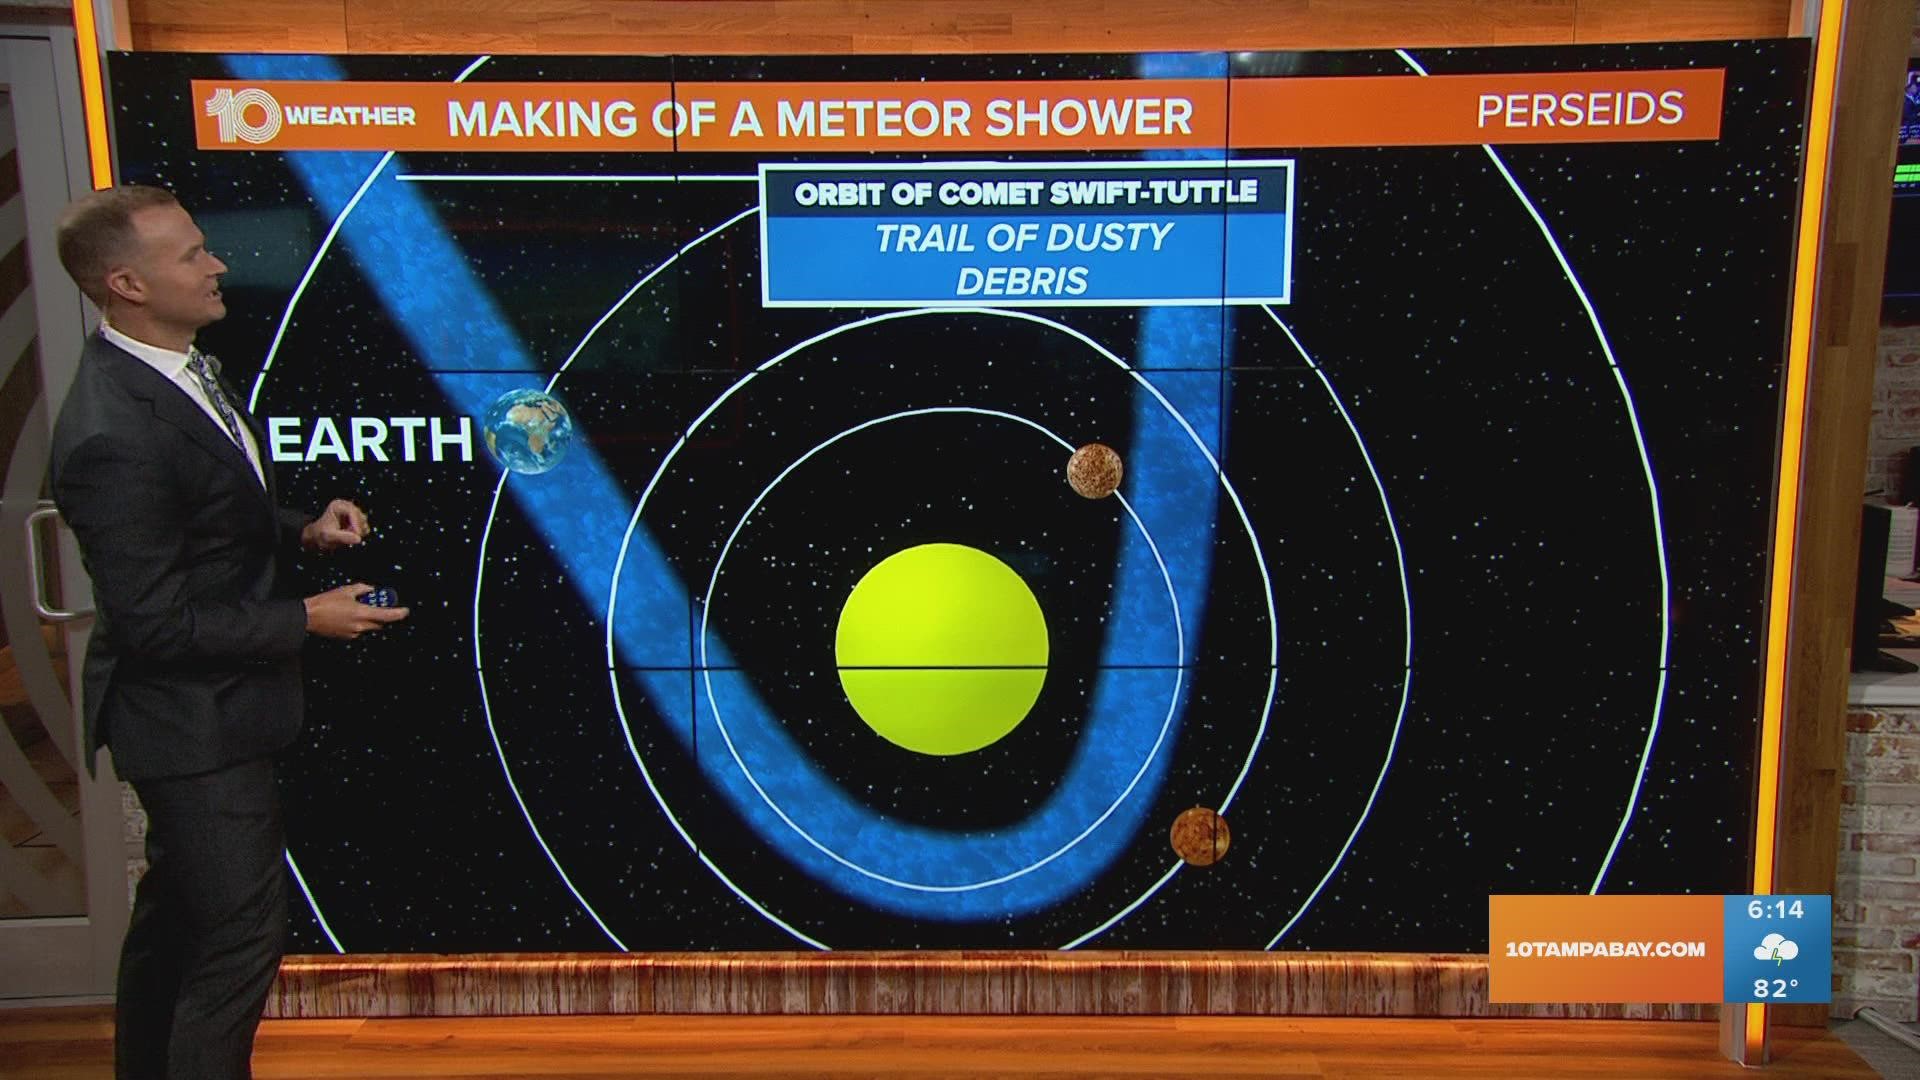 The Perseid meteor shower will be at its peak Aug. 11-13 as Earth moves through dusty debris left behind by a comet.